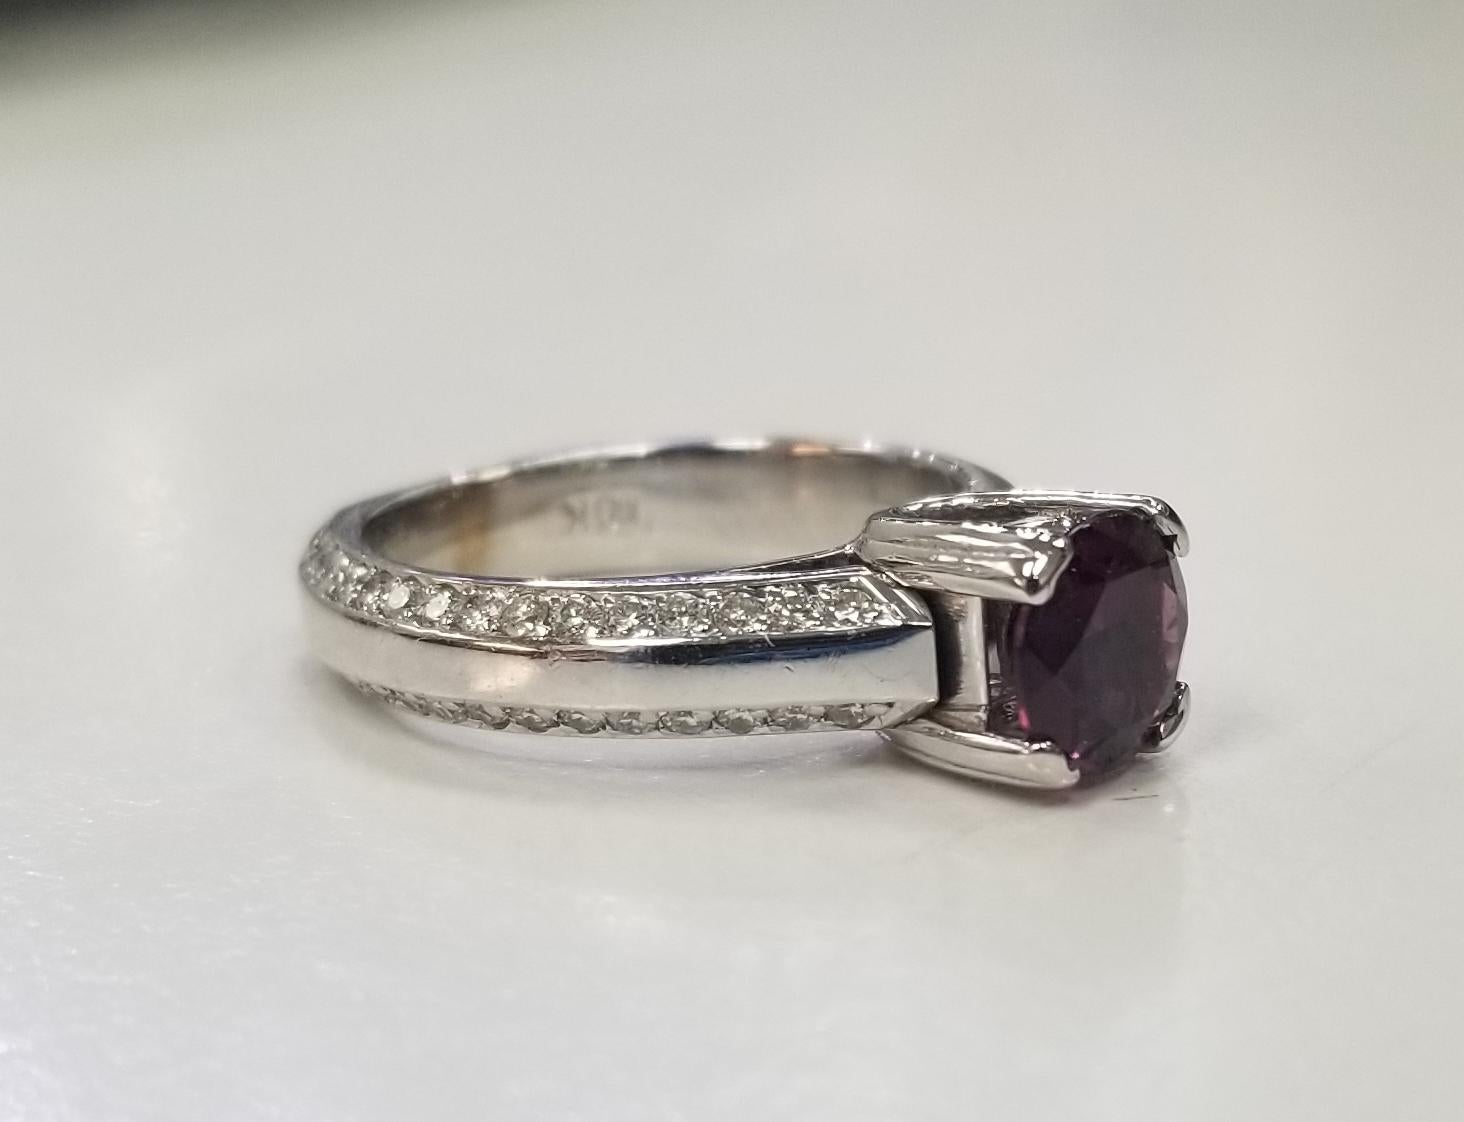 
Specifications:
    main stone:1 Rhodolite Garnet Round 1.43cts.
    DIAMONDS:64PCS
    DIAMONDS carat total weight:APPROX. 0.75 CARAT TOTAL WEIGHT
    color:GH
    clarity:VS2
    metal:18K GOLD
    type: ring
    weight: 7.3 GrS
    size:6.5